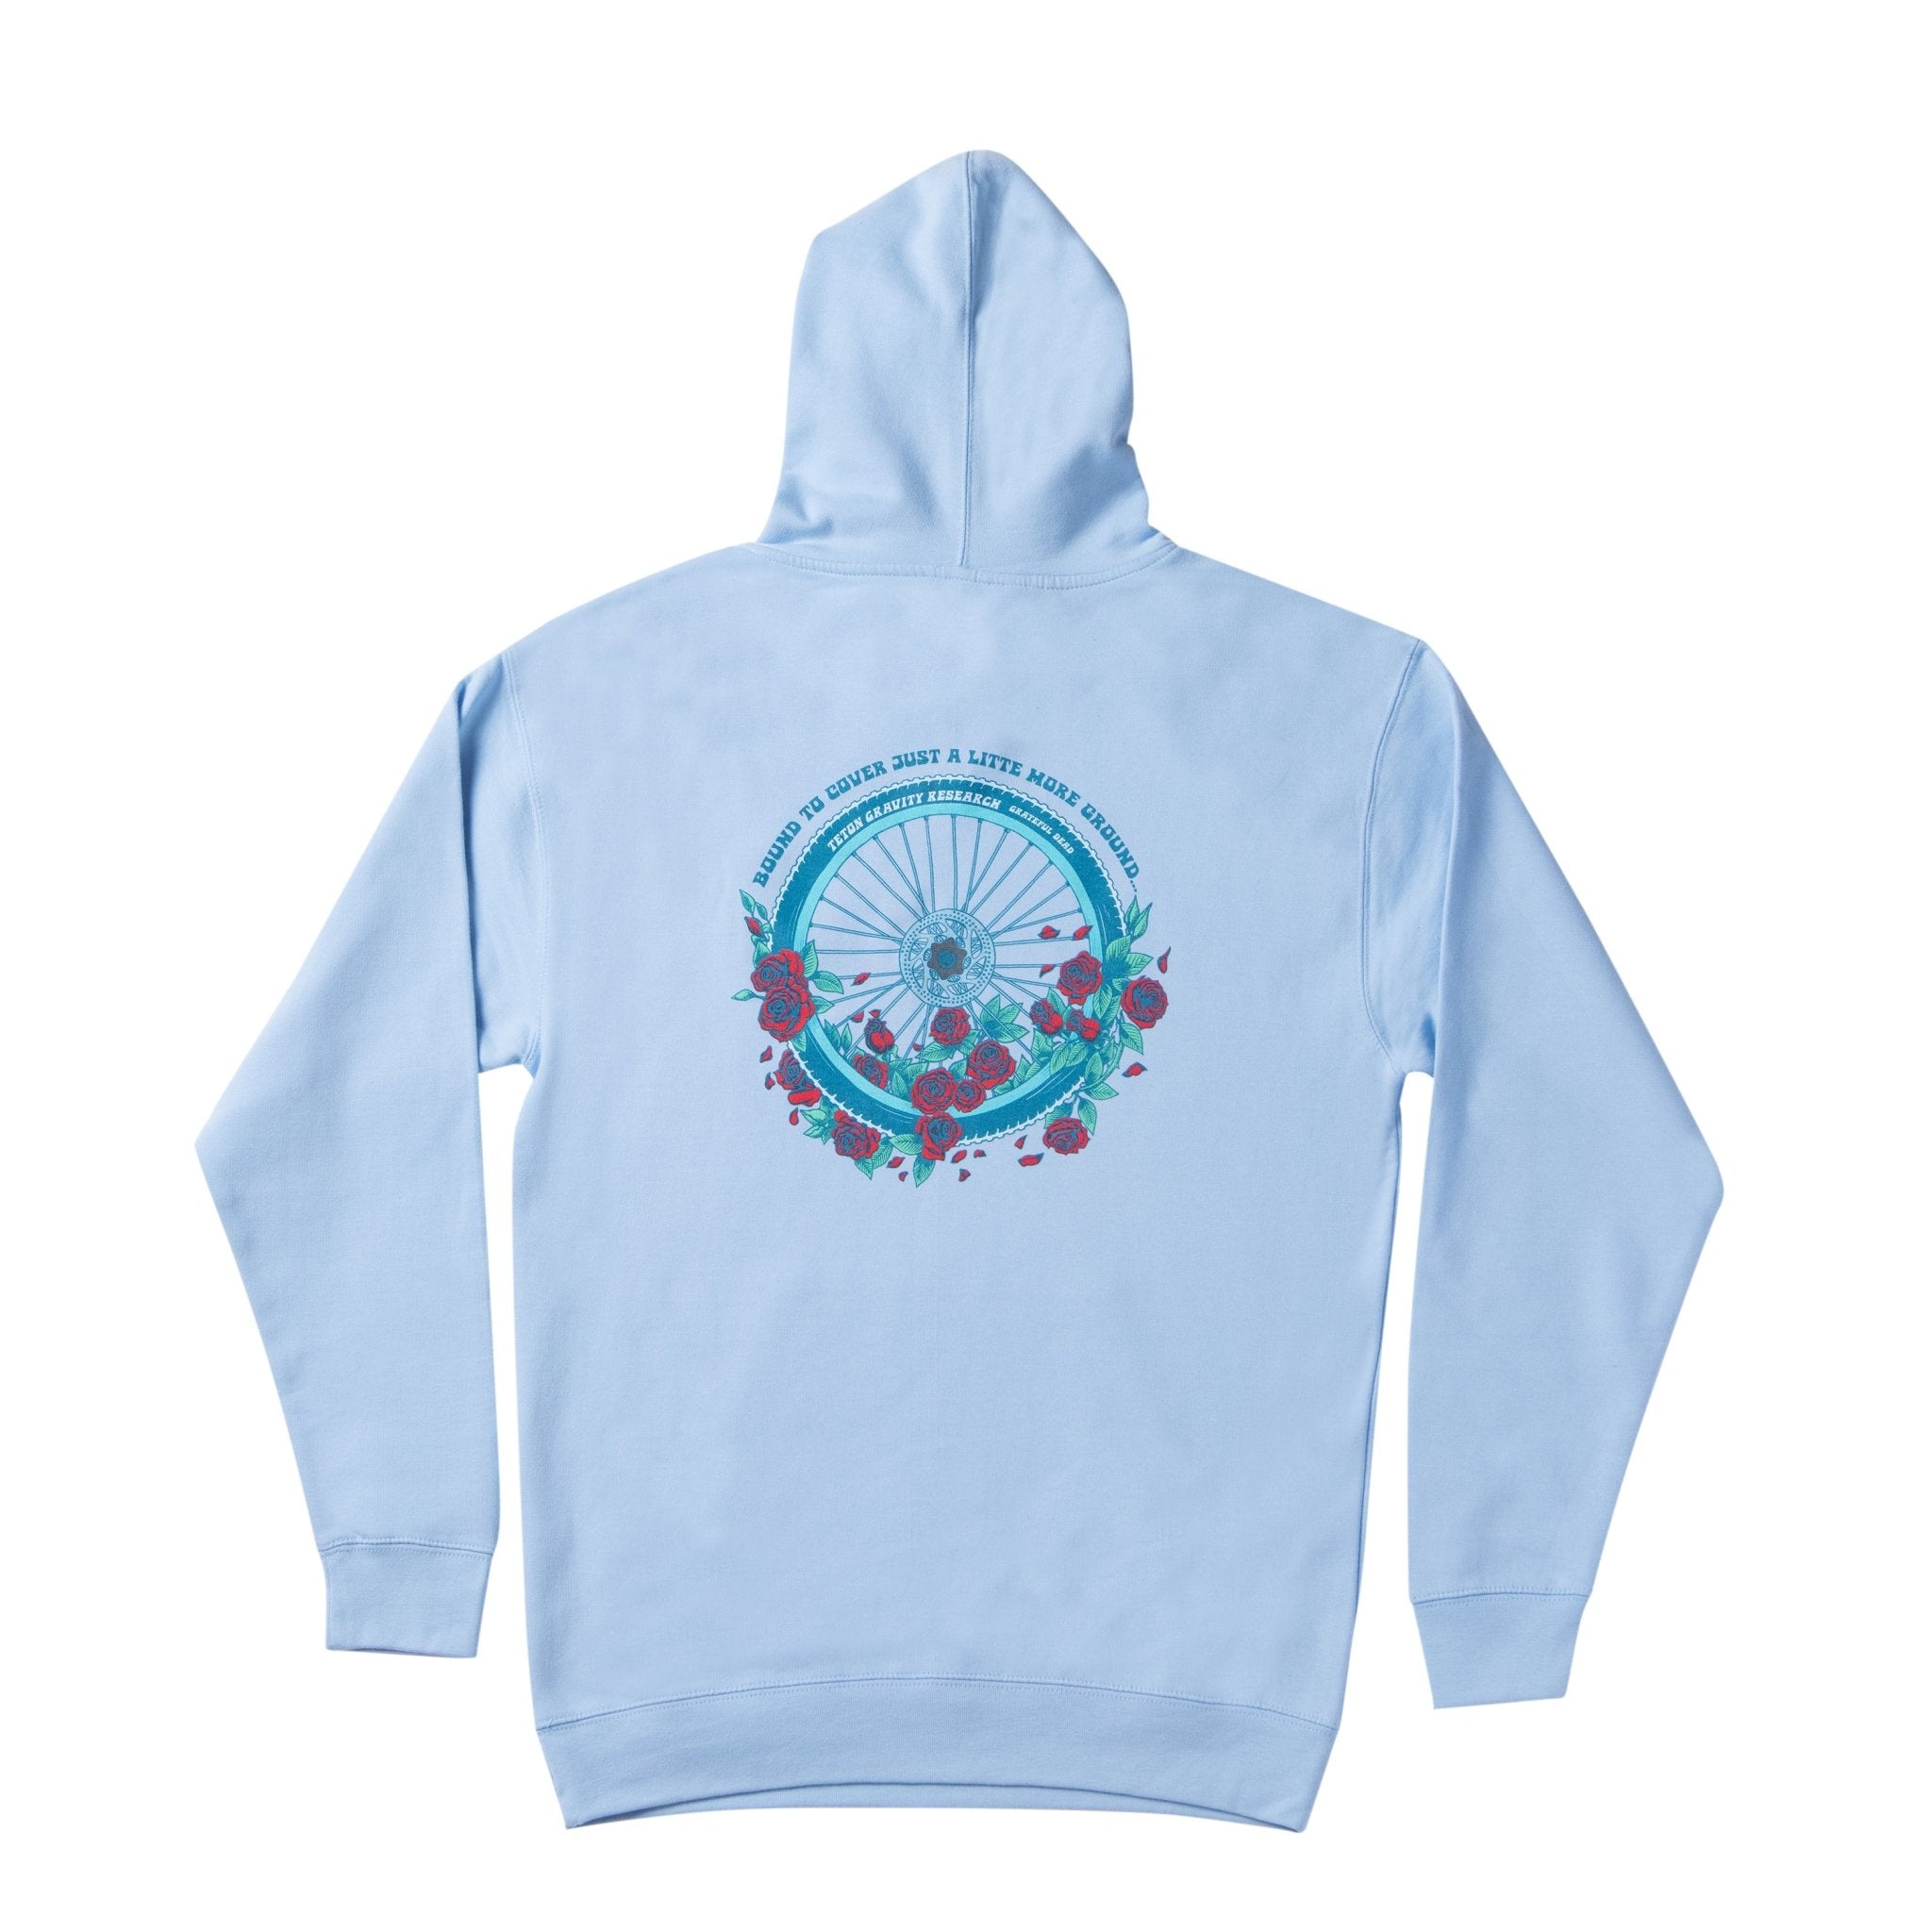 Grateful Dead x TGR “Bound to Cover Just a Little More Ground” Hoodie by  Cetana Works